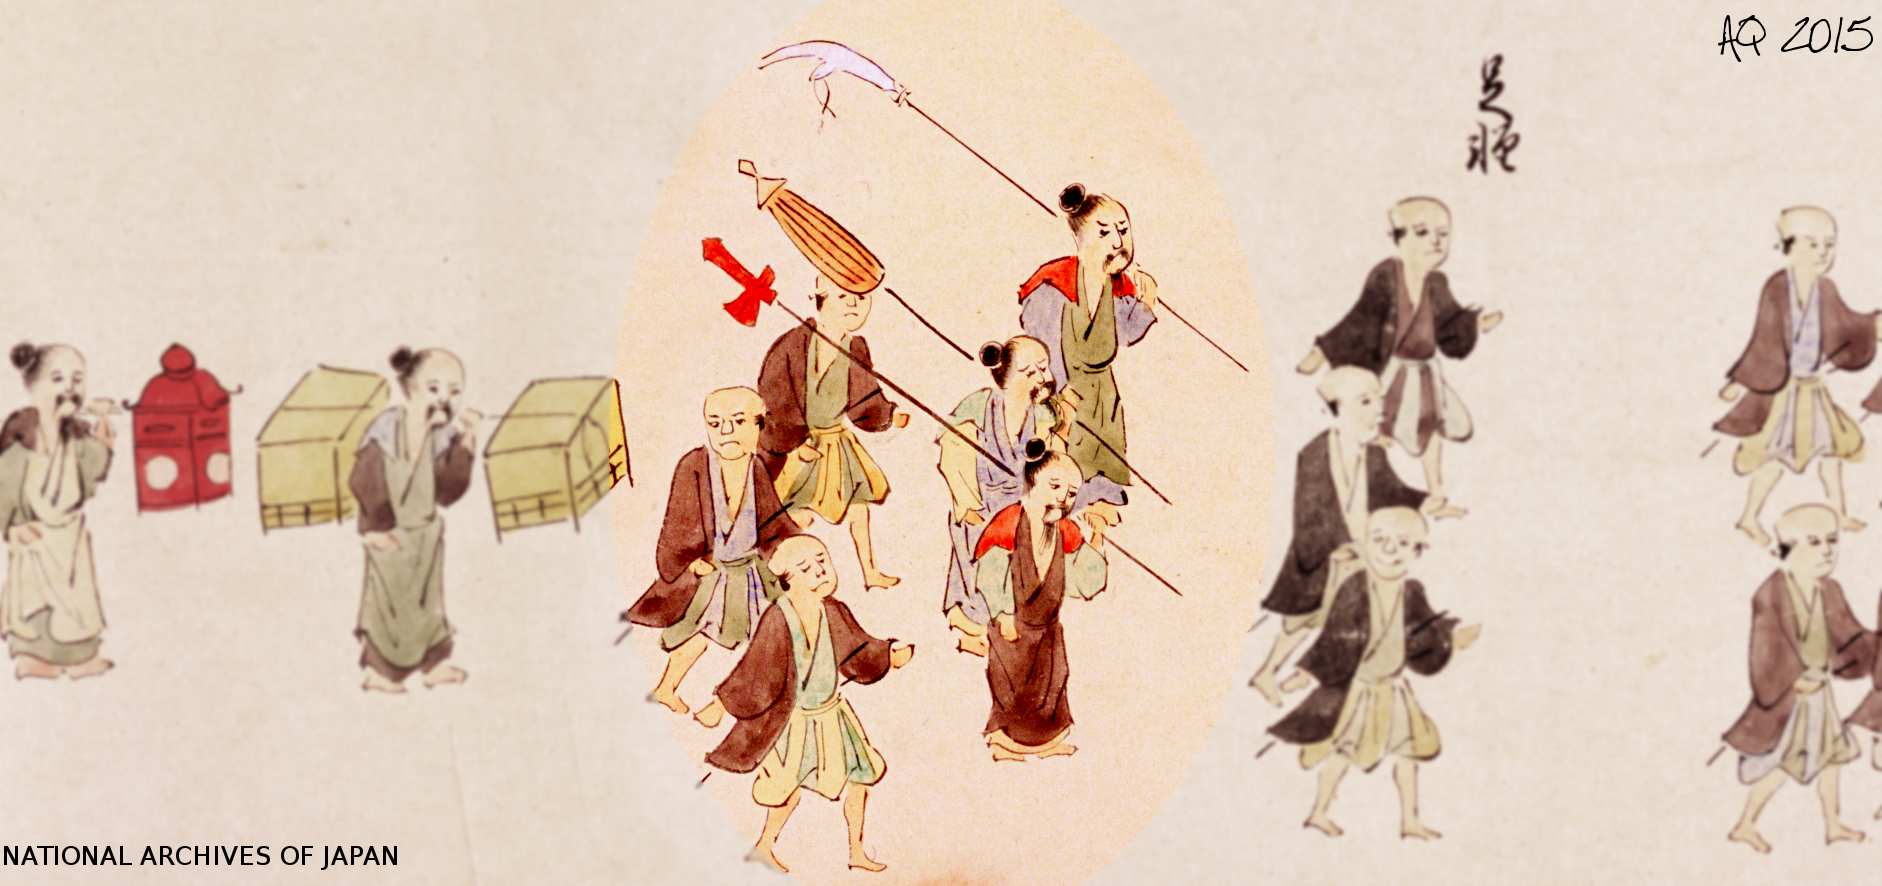 Picture scroll of 1710, showing bearers of ceremonial equipment/weaponry following Tomigusuku Oji. Source: Japan National Archives.